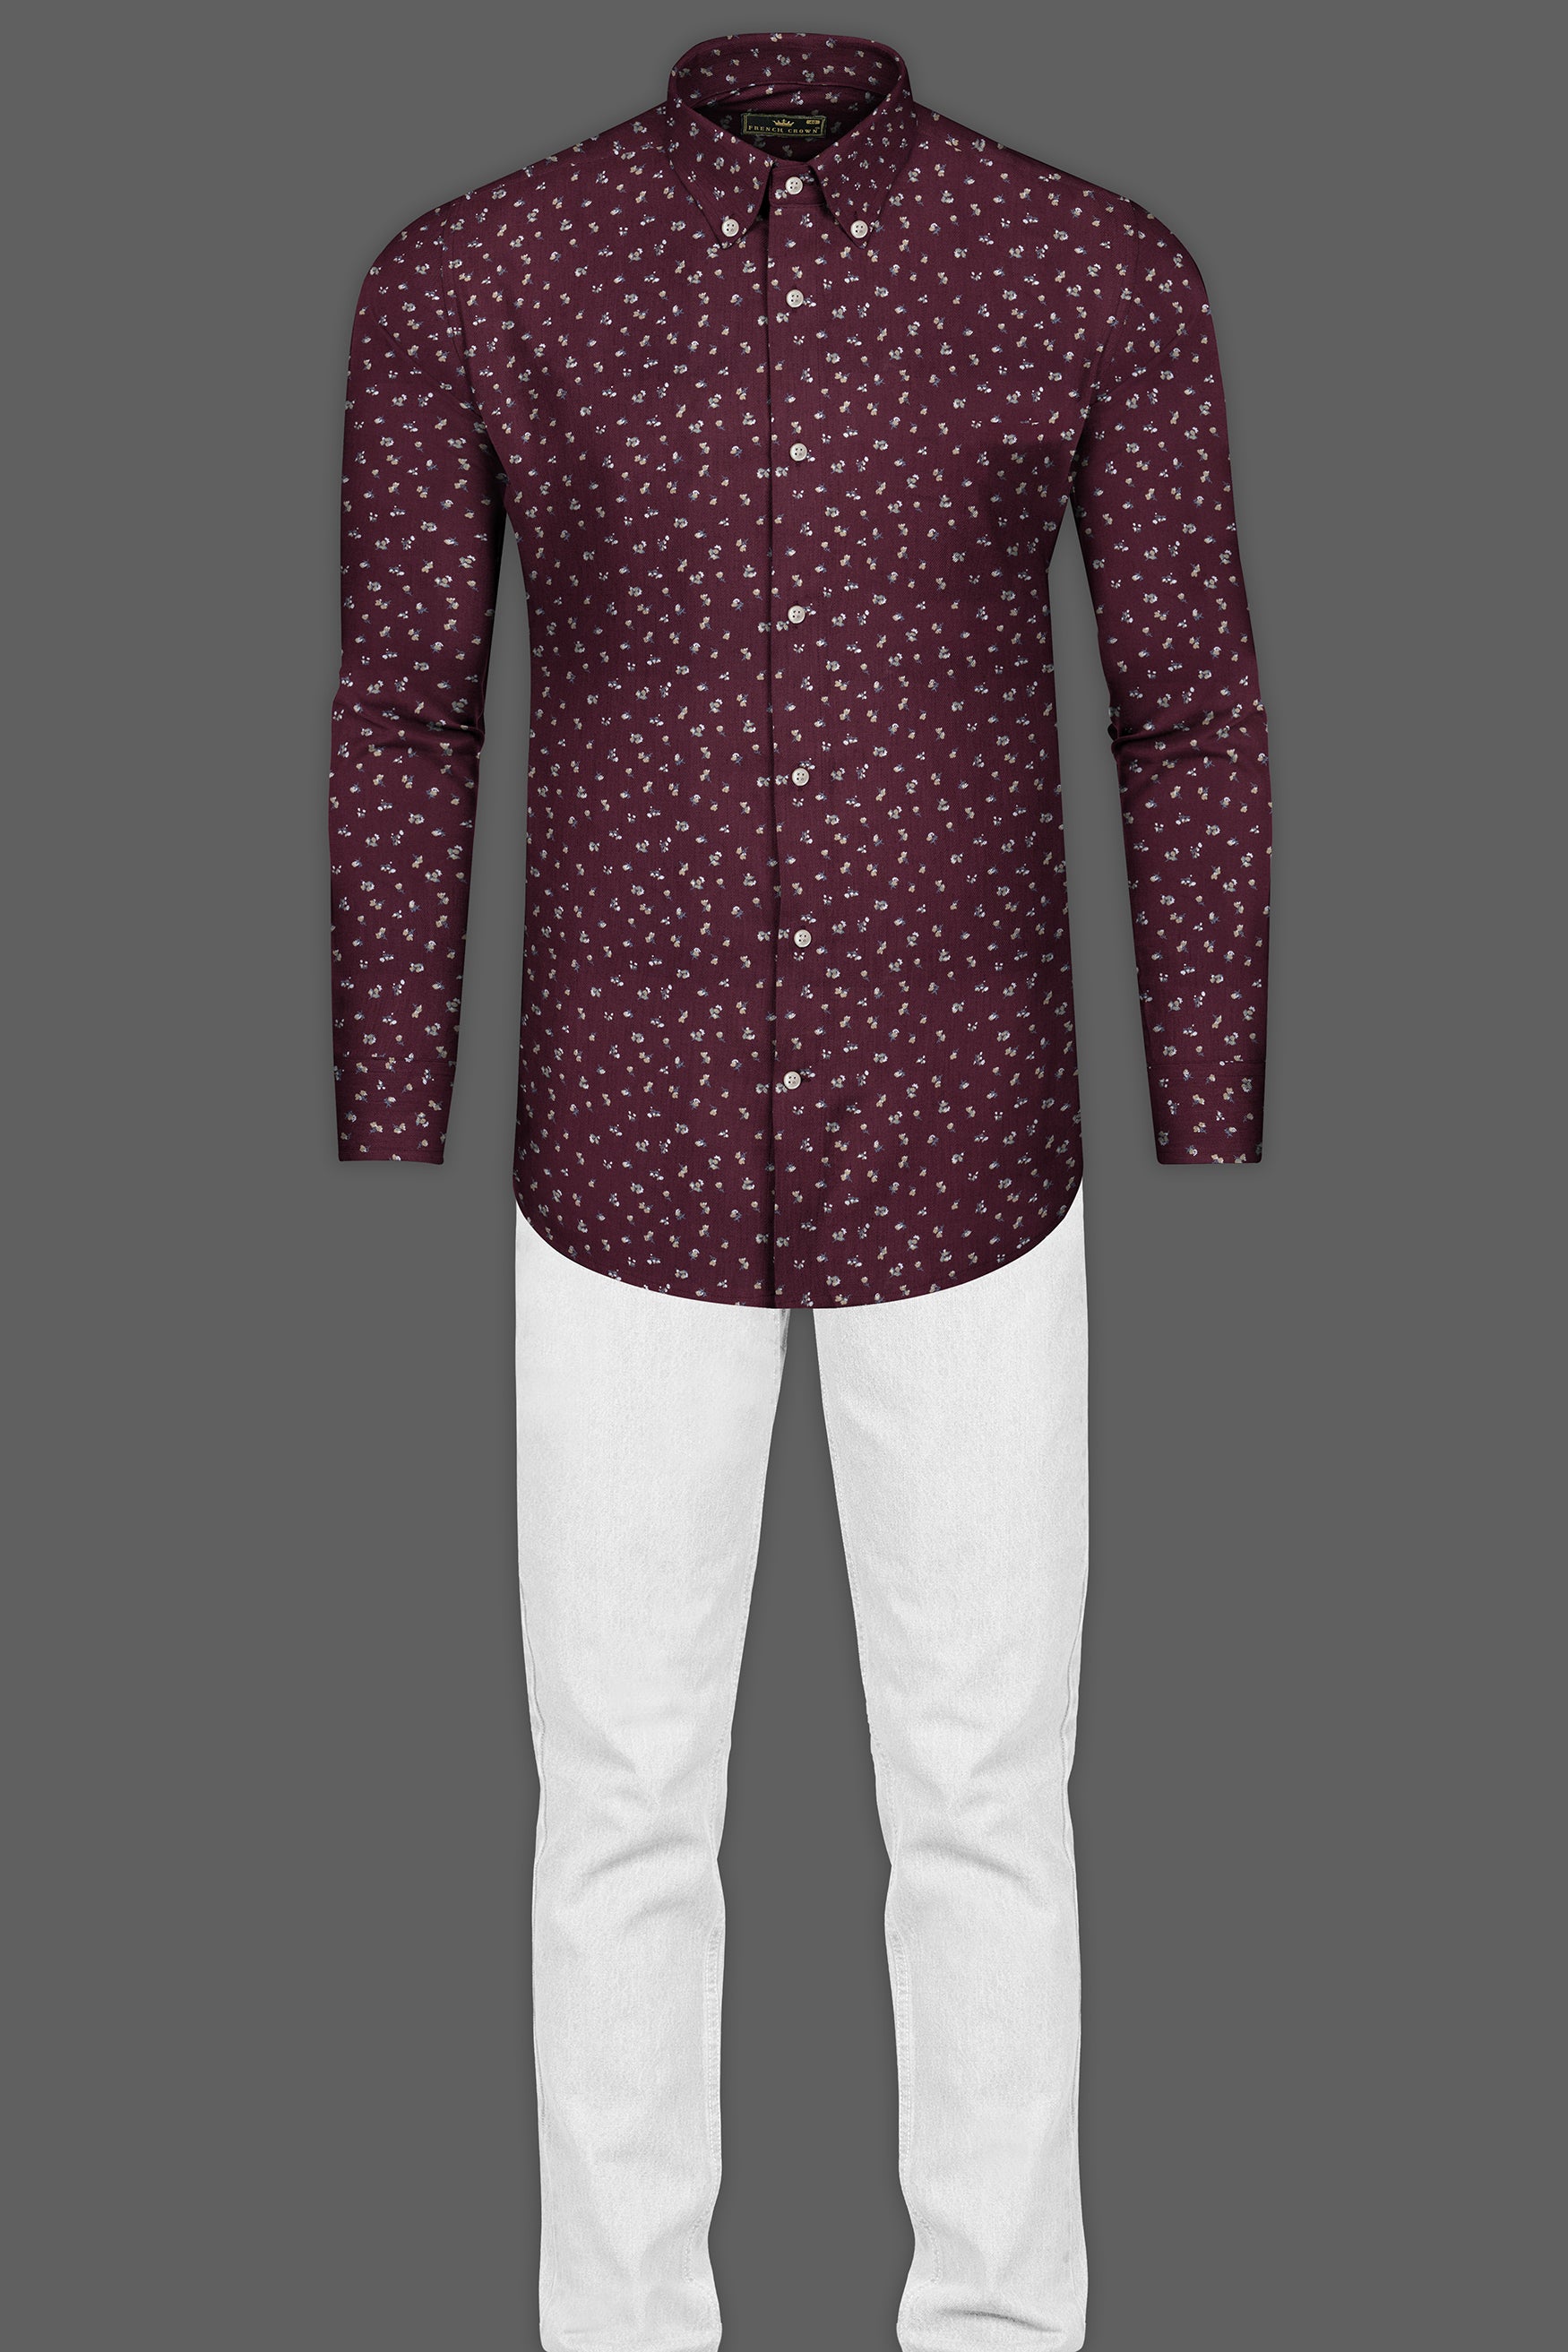 Wine Color with Ditsy Flower Printed Twill Premium Cotton Shirt